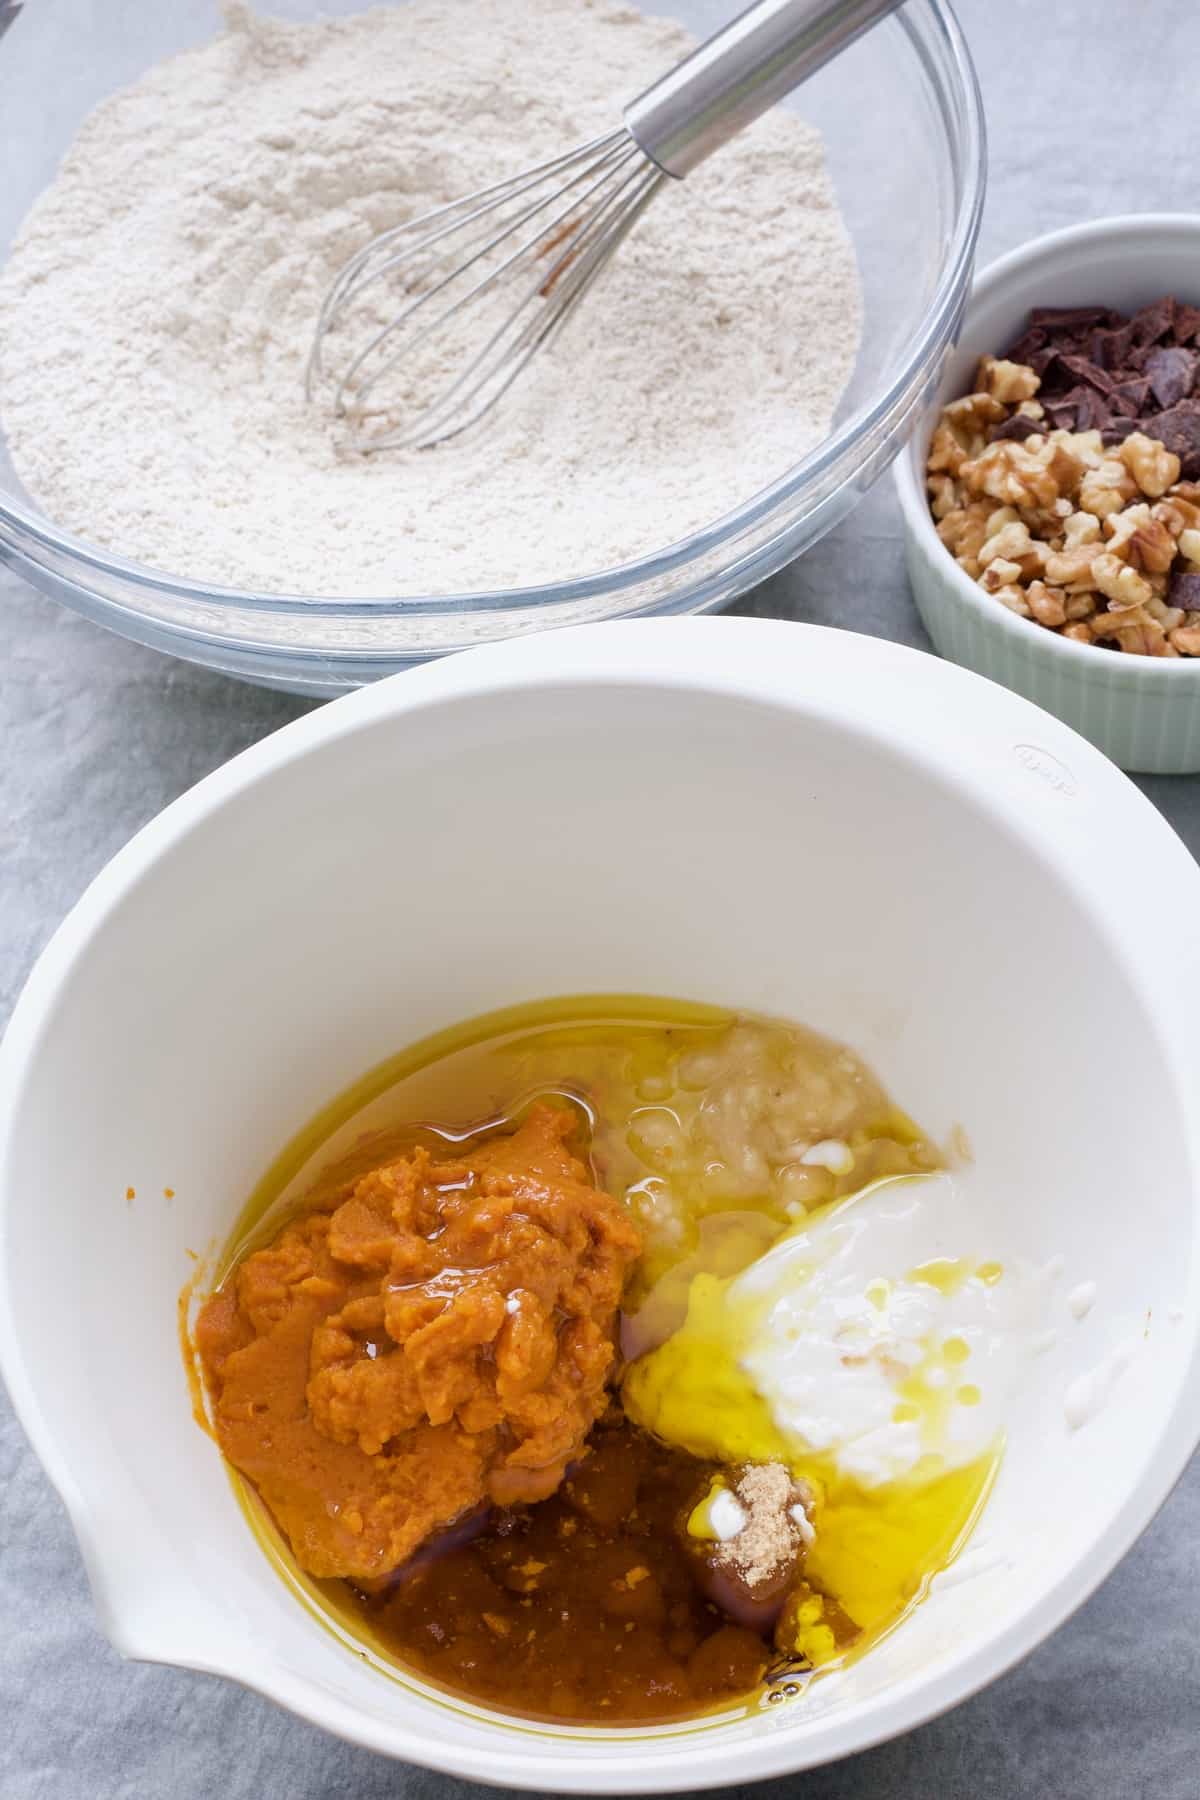 Wet and dry cake ingredients in separate bowls.